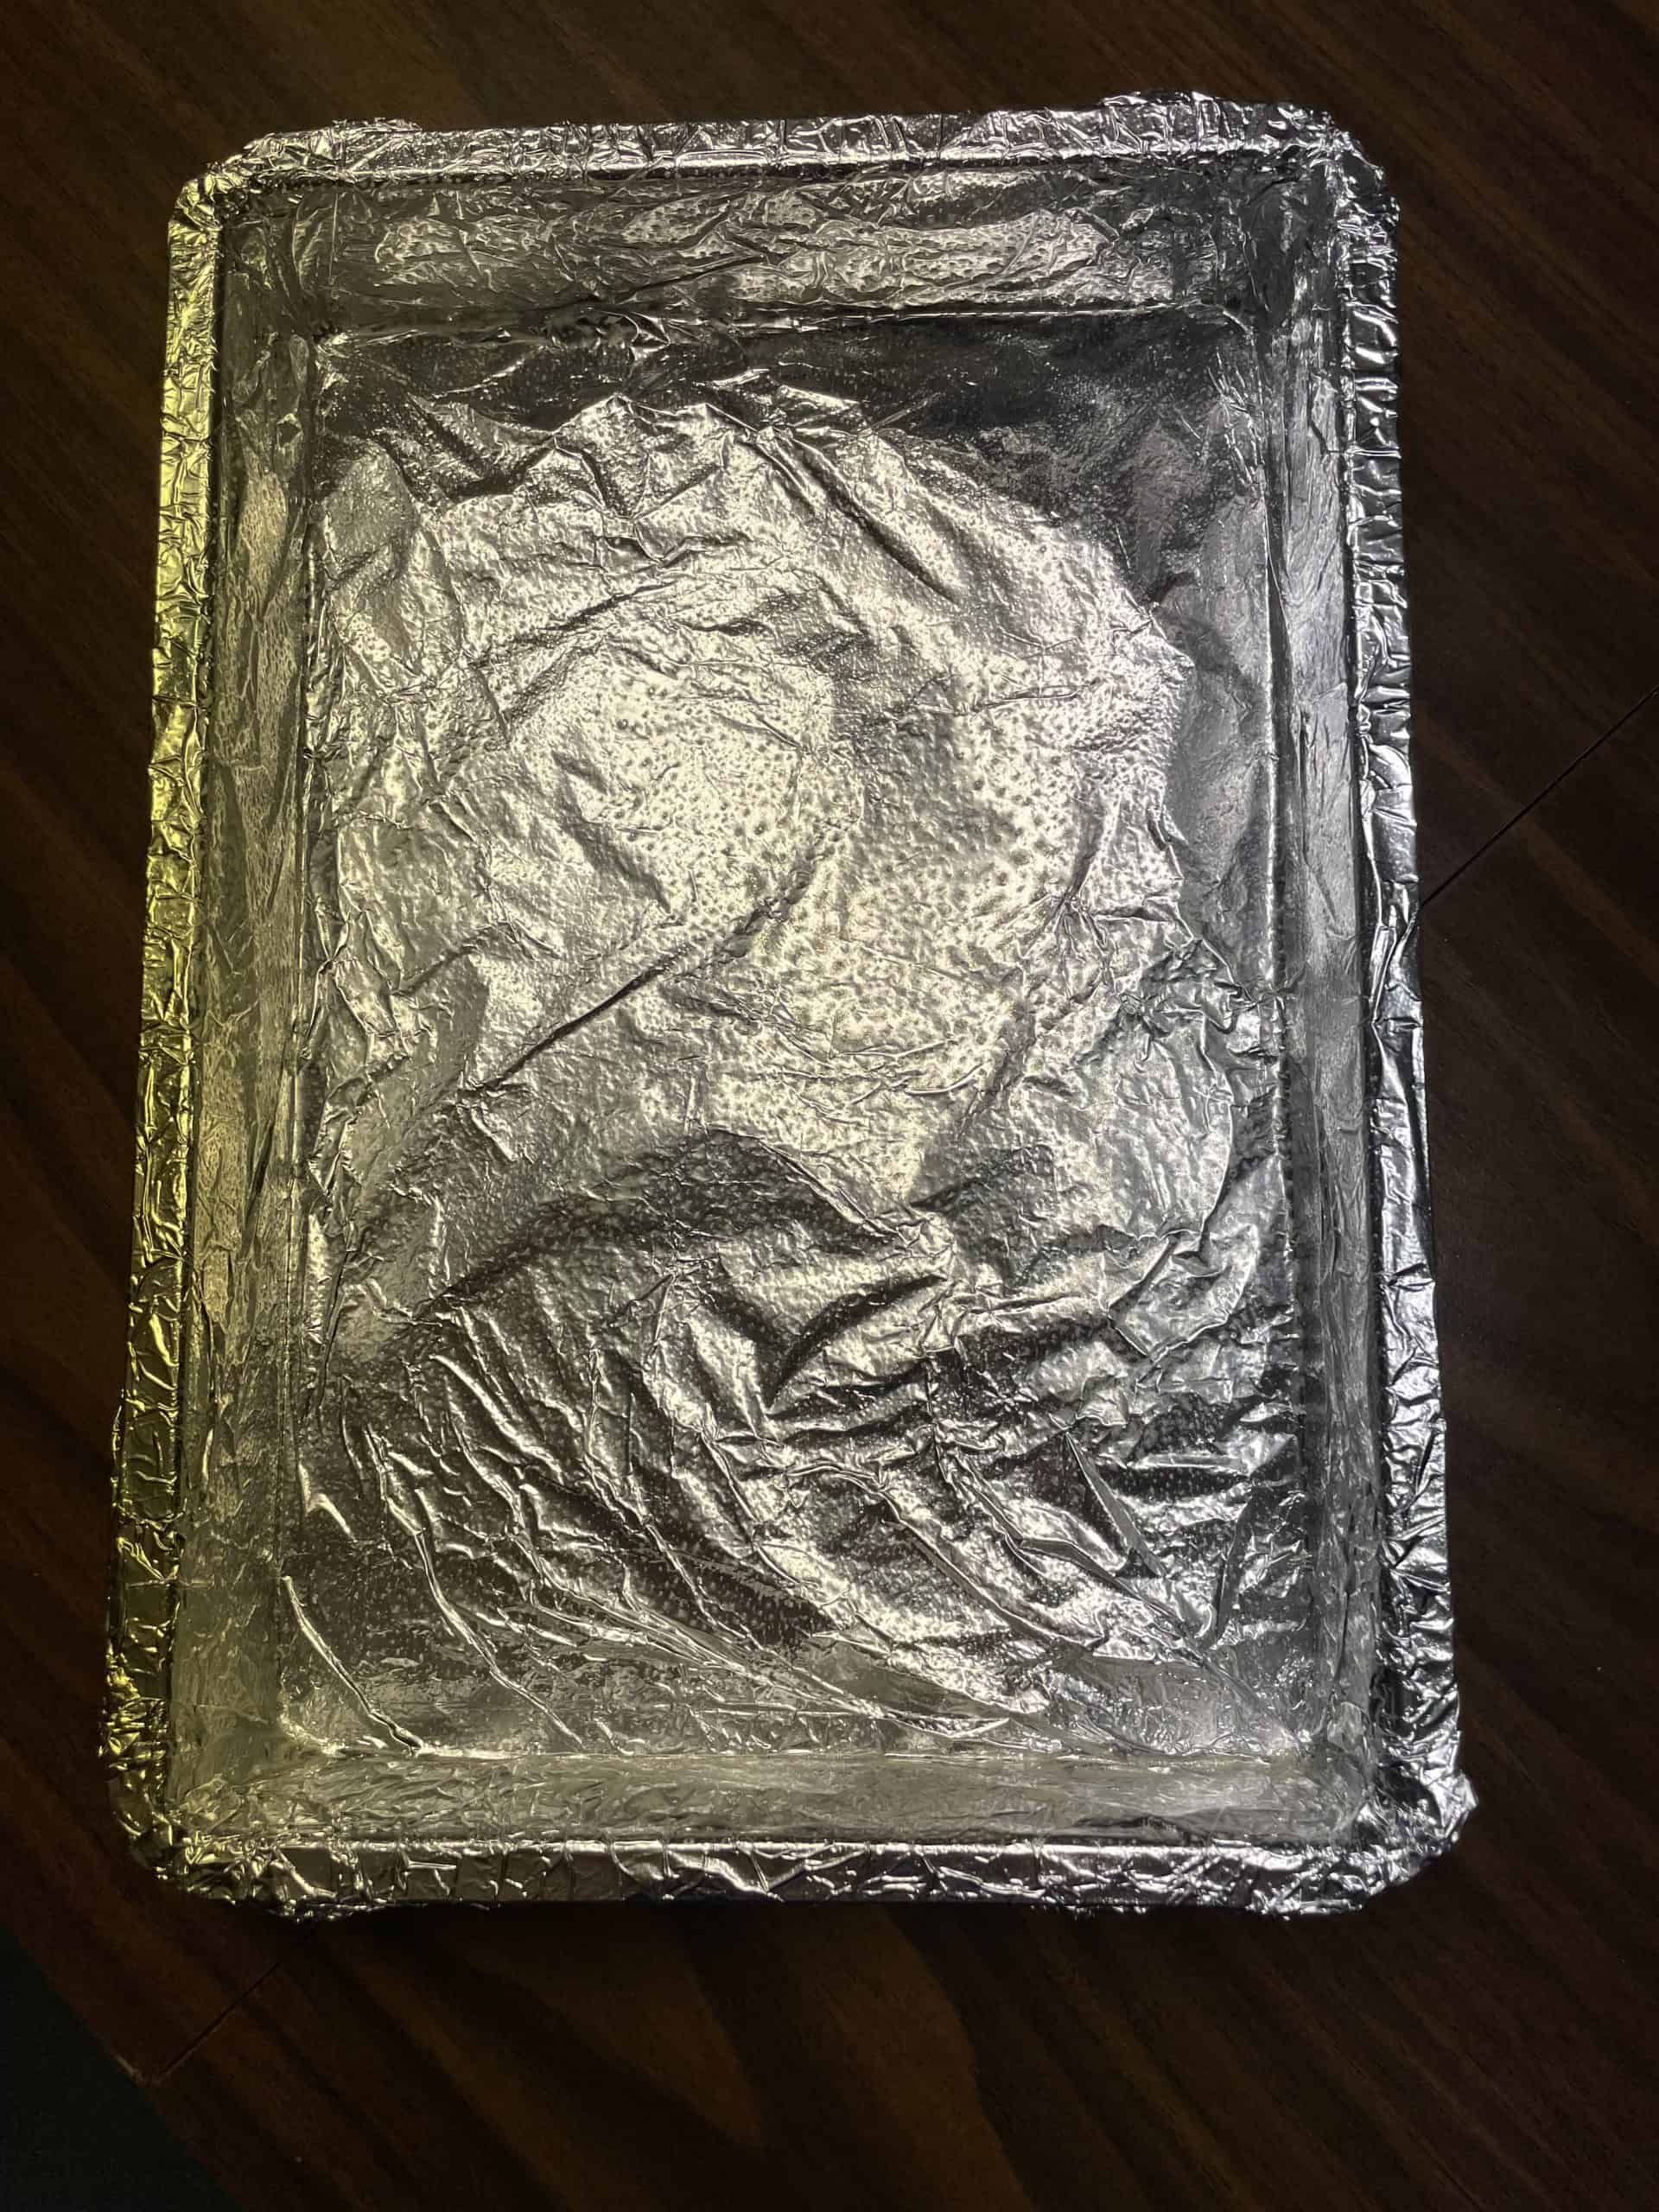 Foil lined 9x13 pan sprayed with cooking spray.